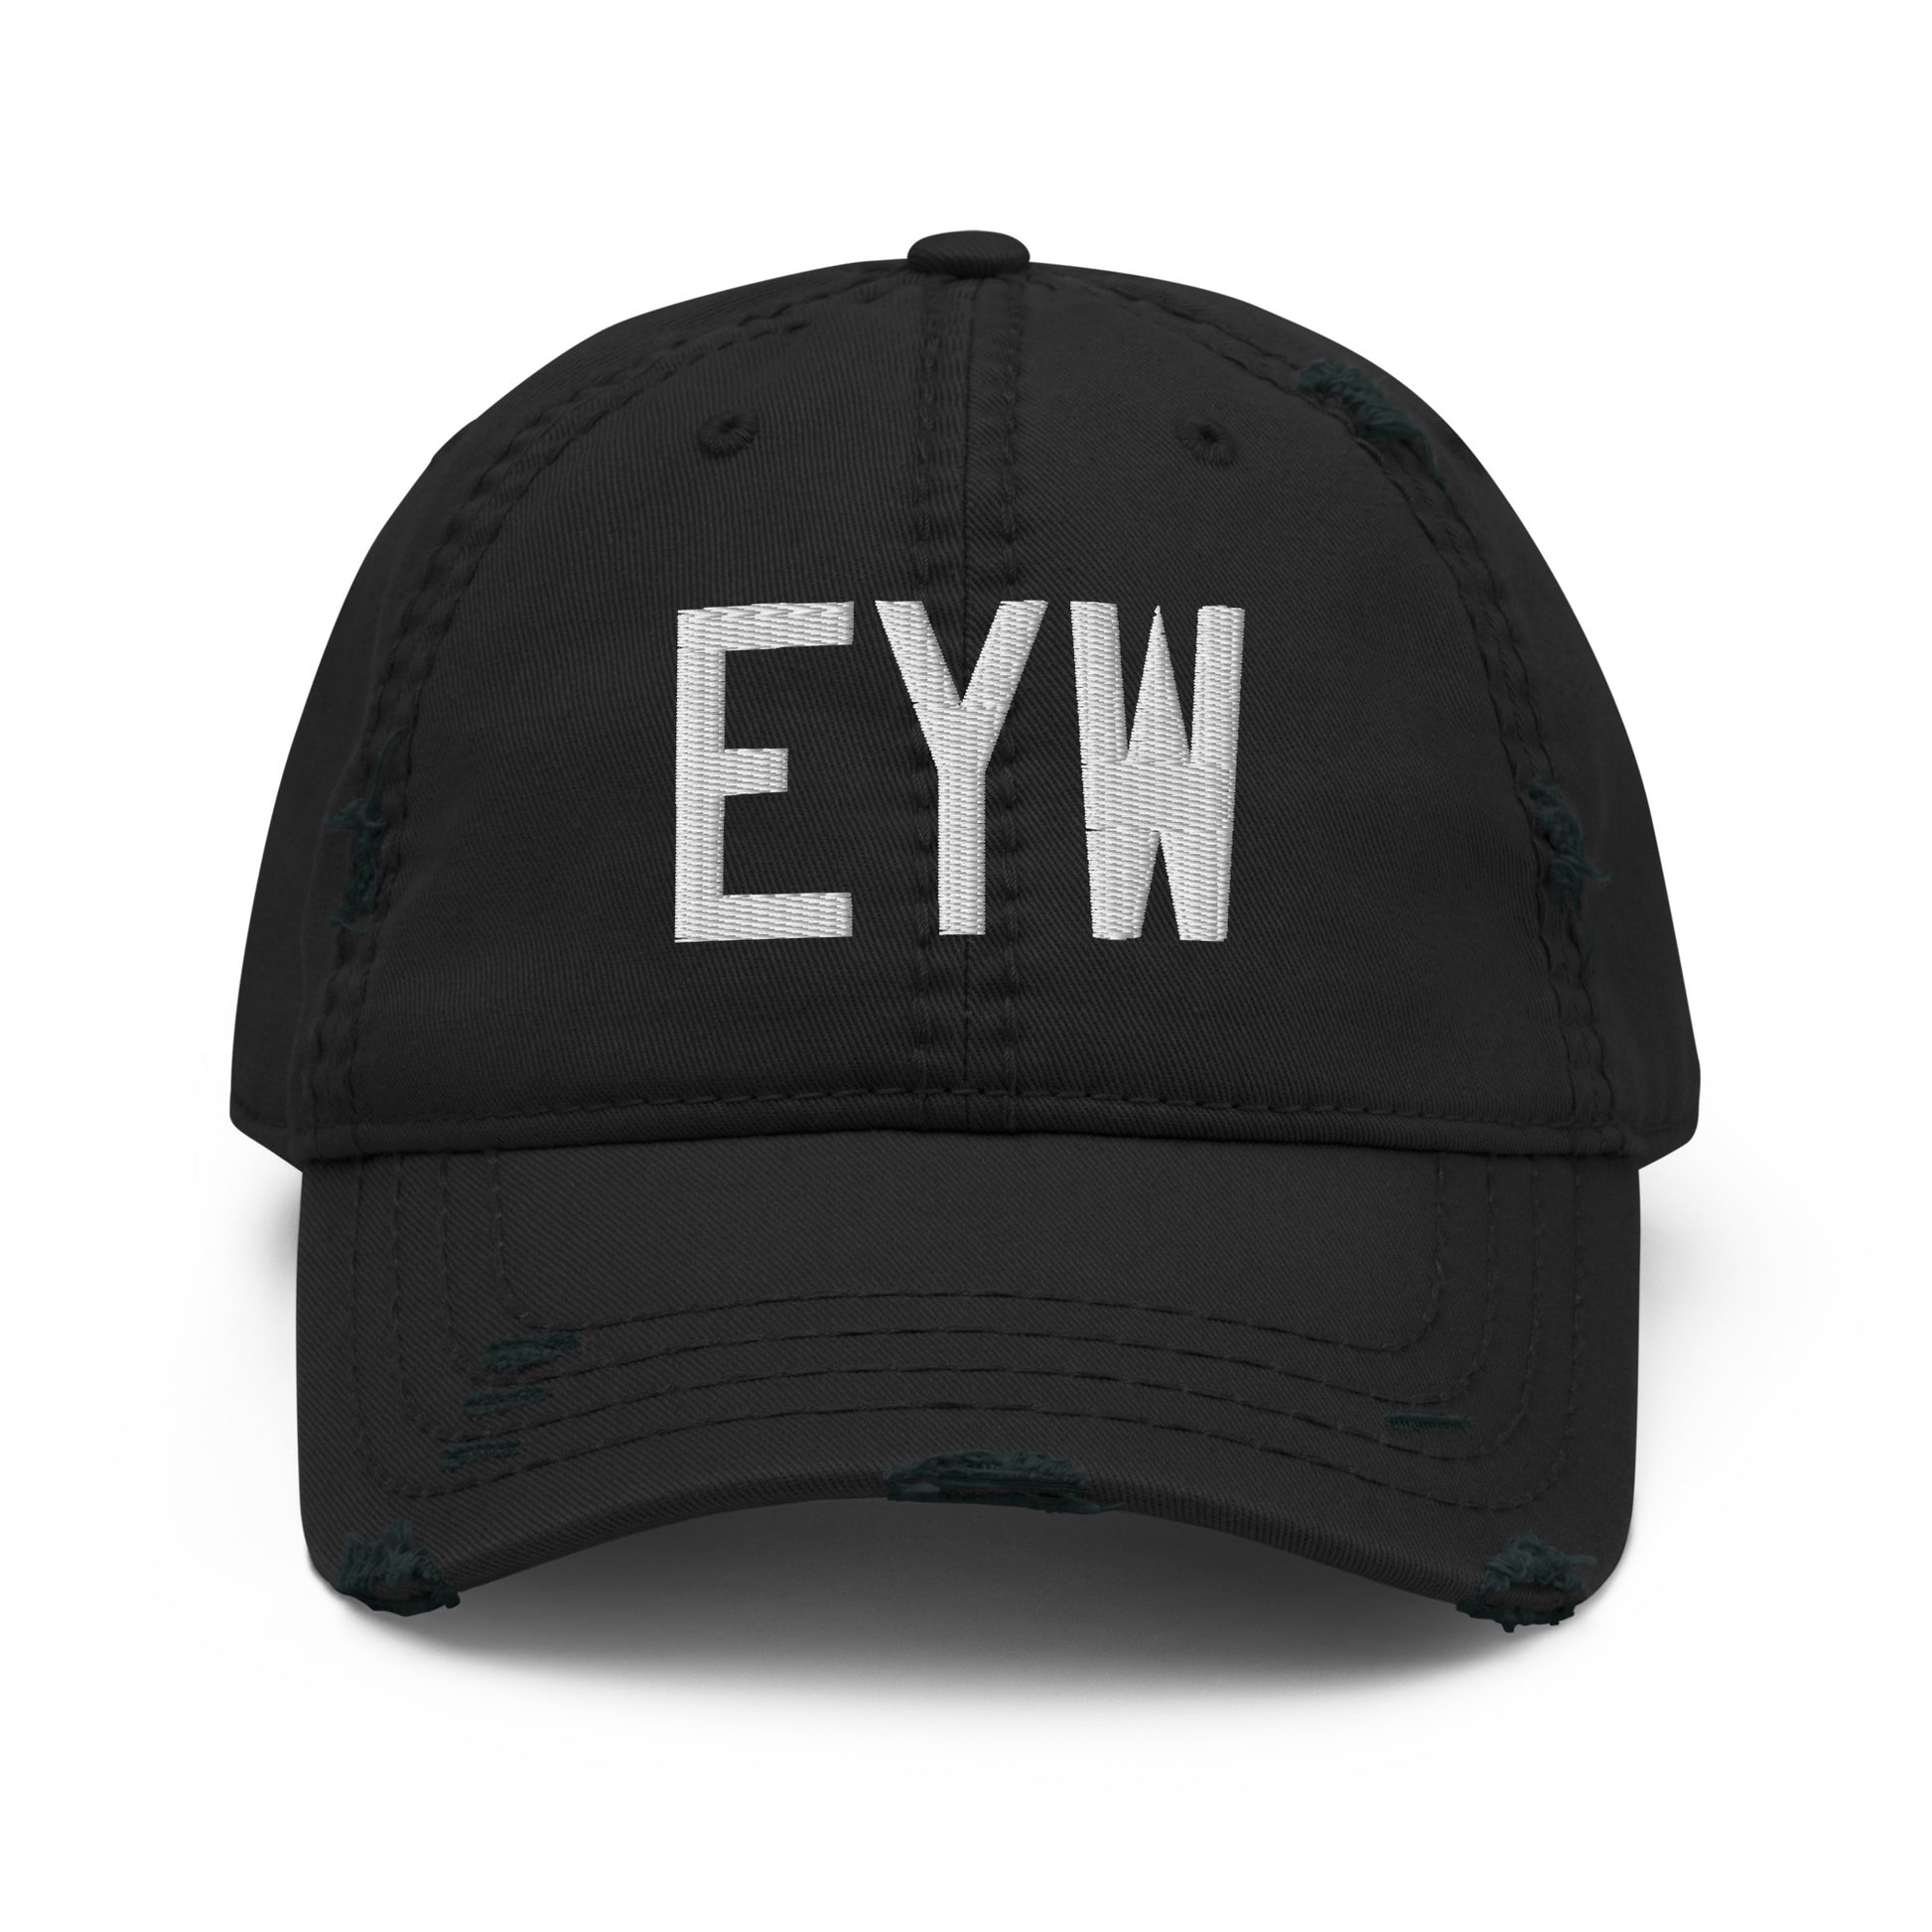 Airport Code Distressed Hat - White • EYW Key West • YHM Designs - Image 10